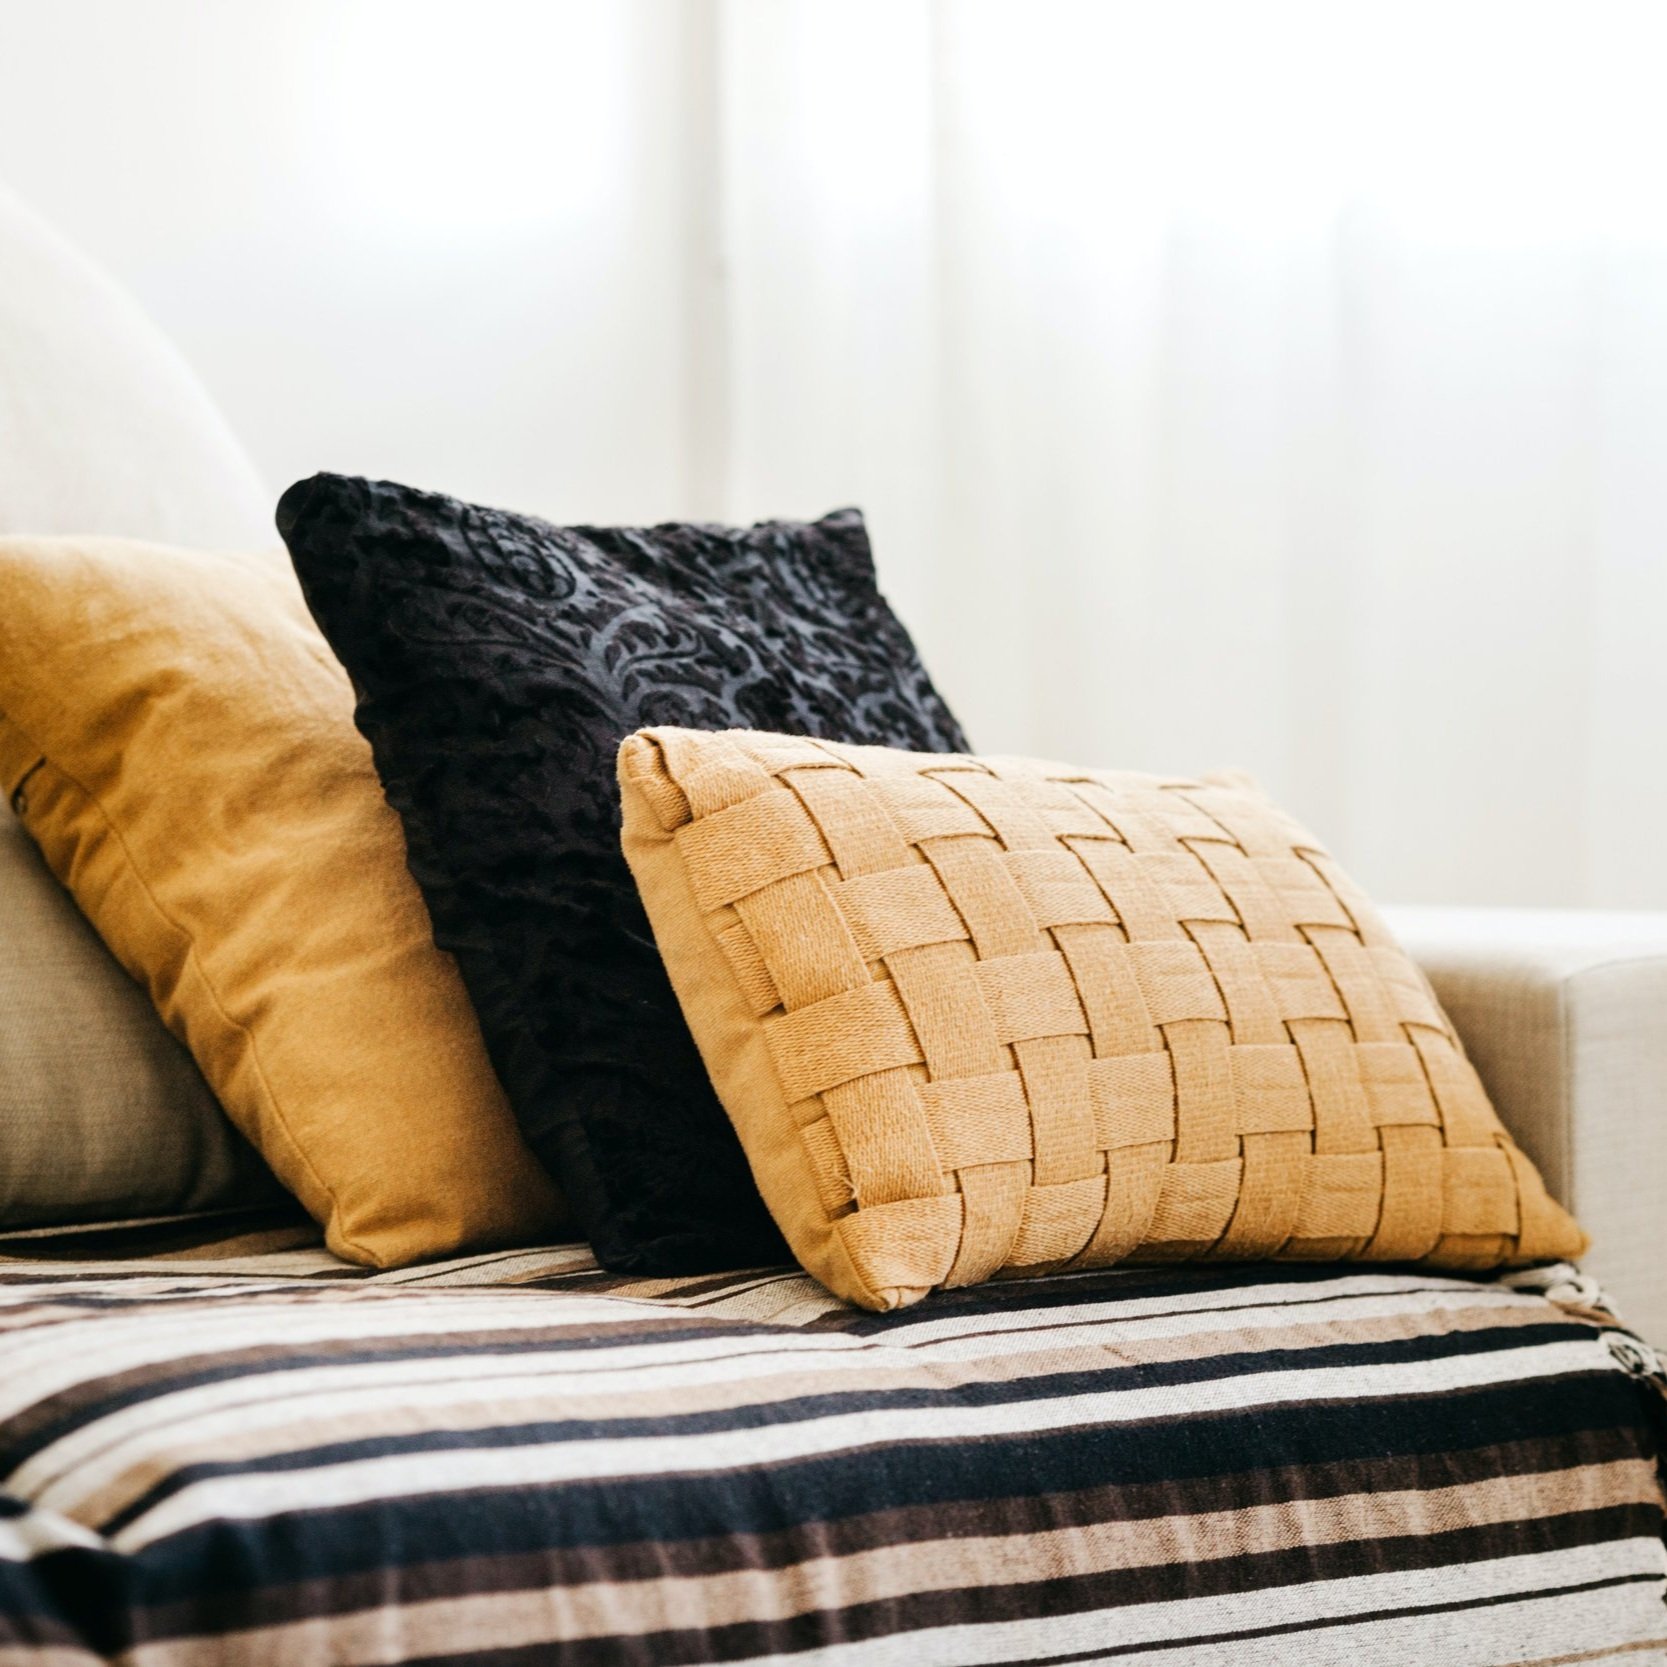 add fall themed pillows to update your home for fall